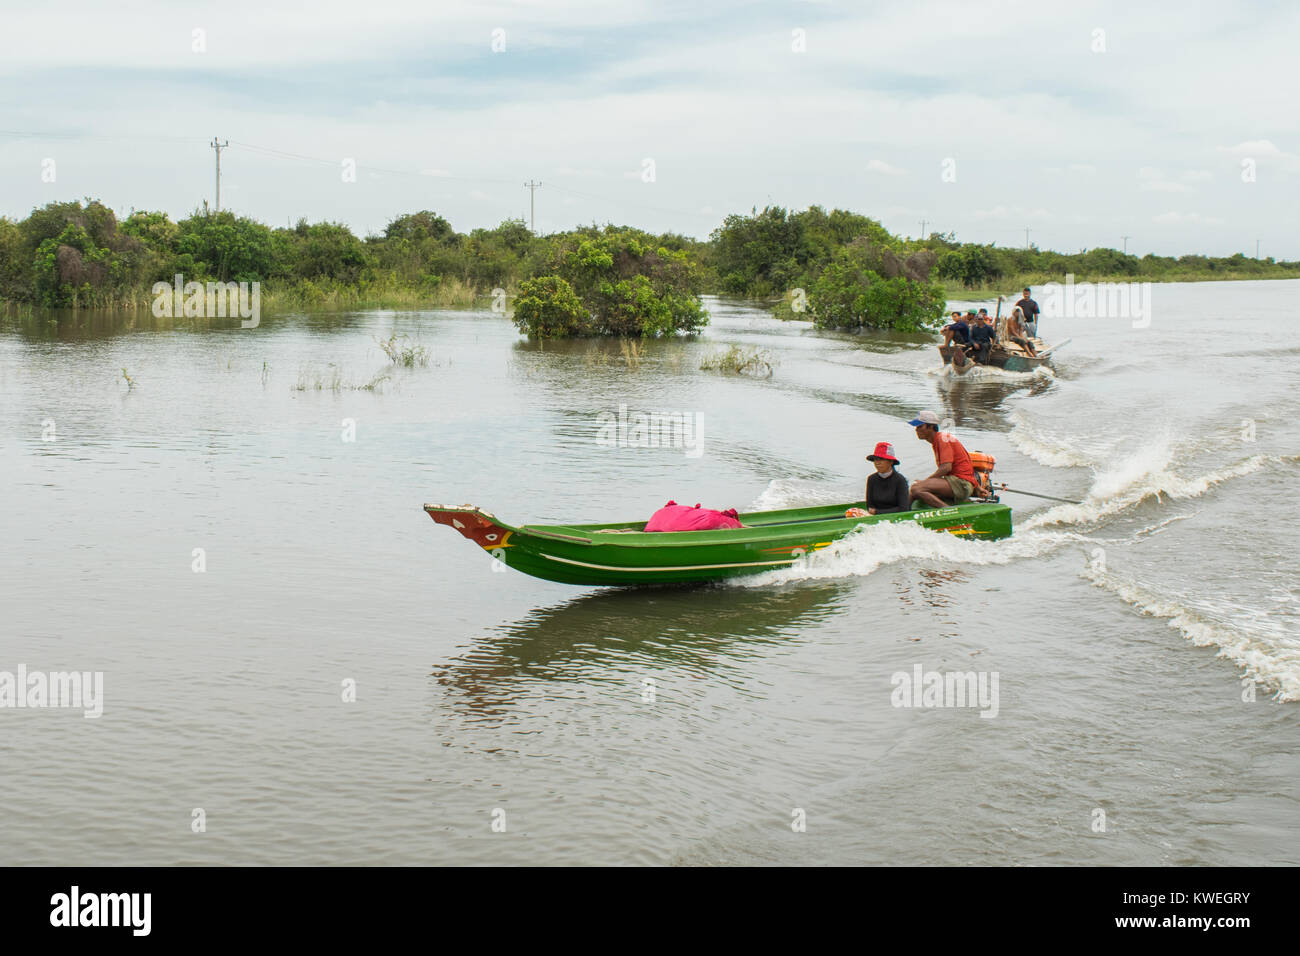 A Cambodian Asian couple sitting on a boat, the man driving the motor powered thin long boat over Tonle Sap Great Lake floodplain Kampong Phluk, Asia Stock Photo